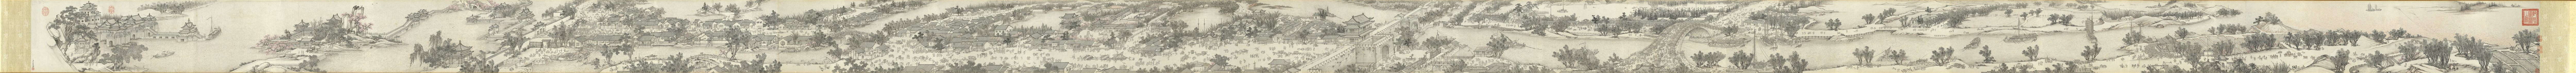 Along the River During the Qingming Festival (by Shen Yuan)